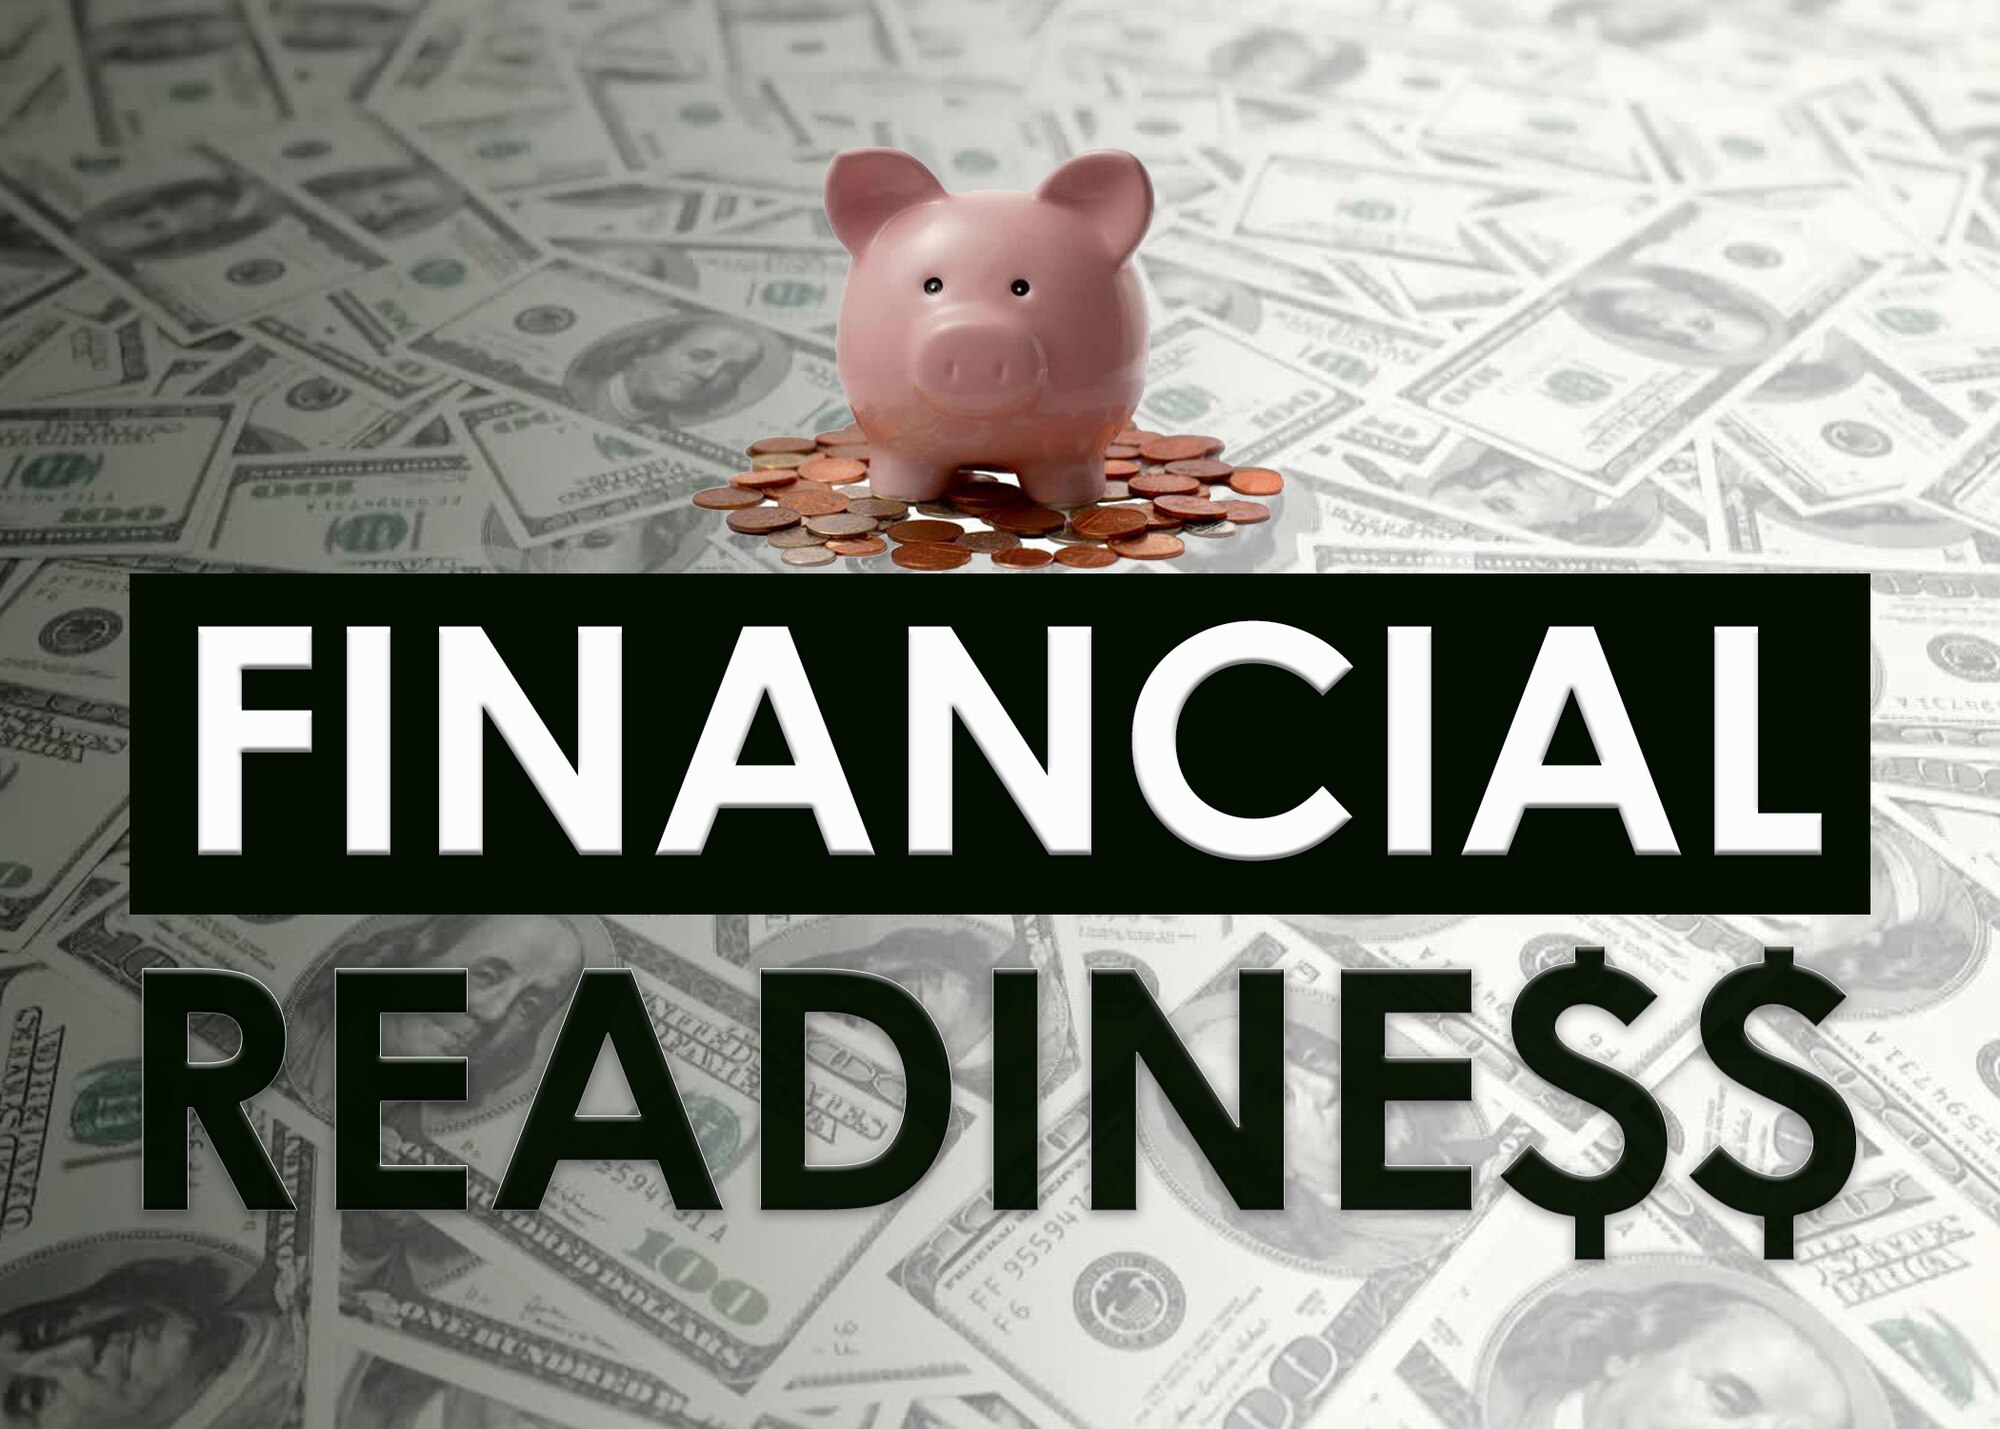 Piggy bank on money and text of Financial Readiness